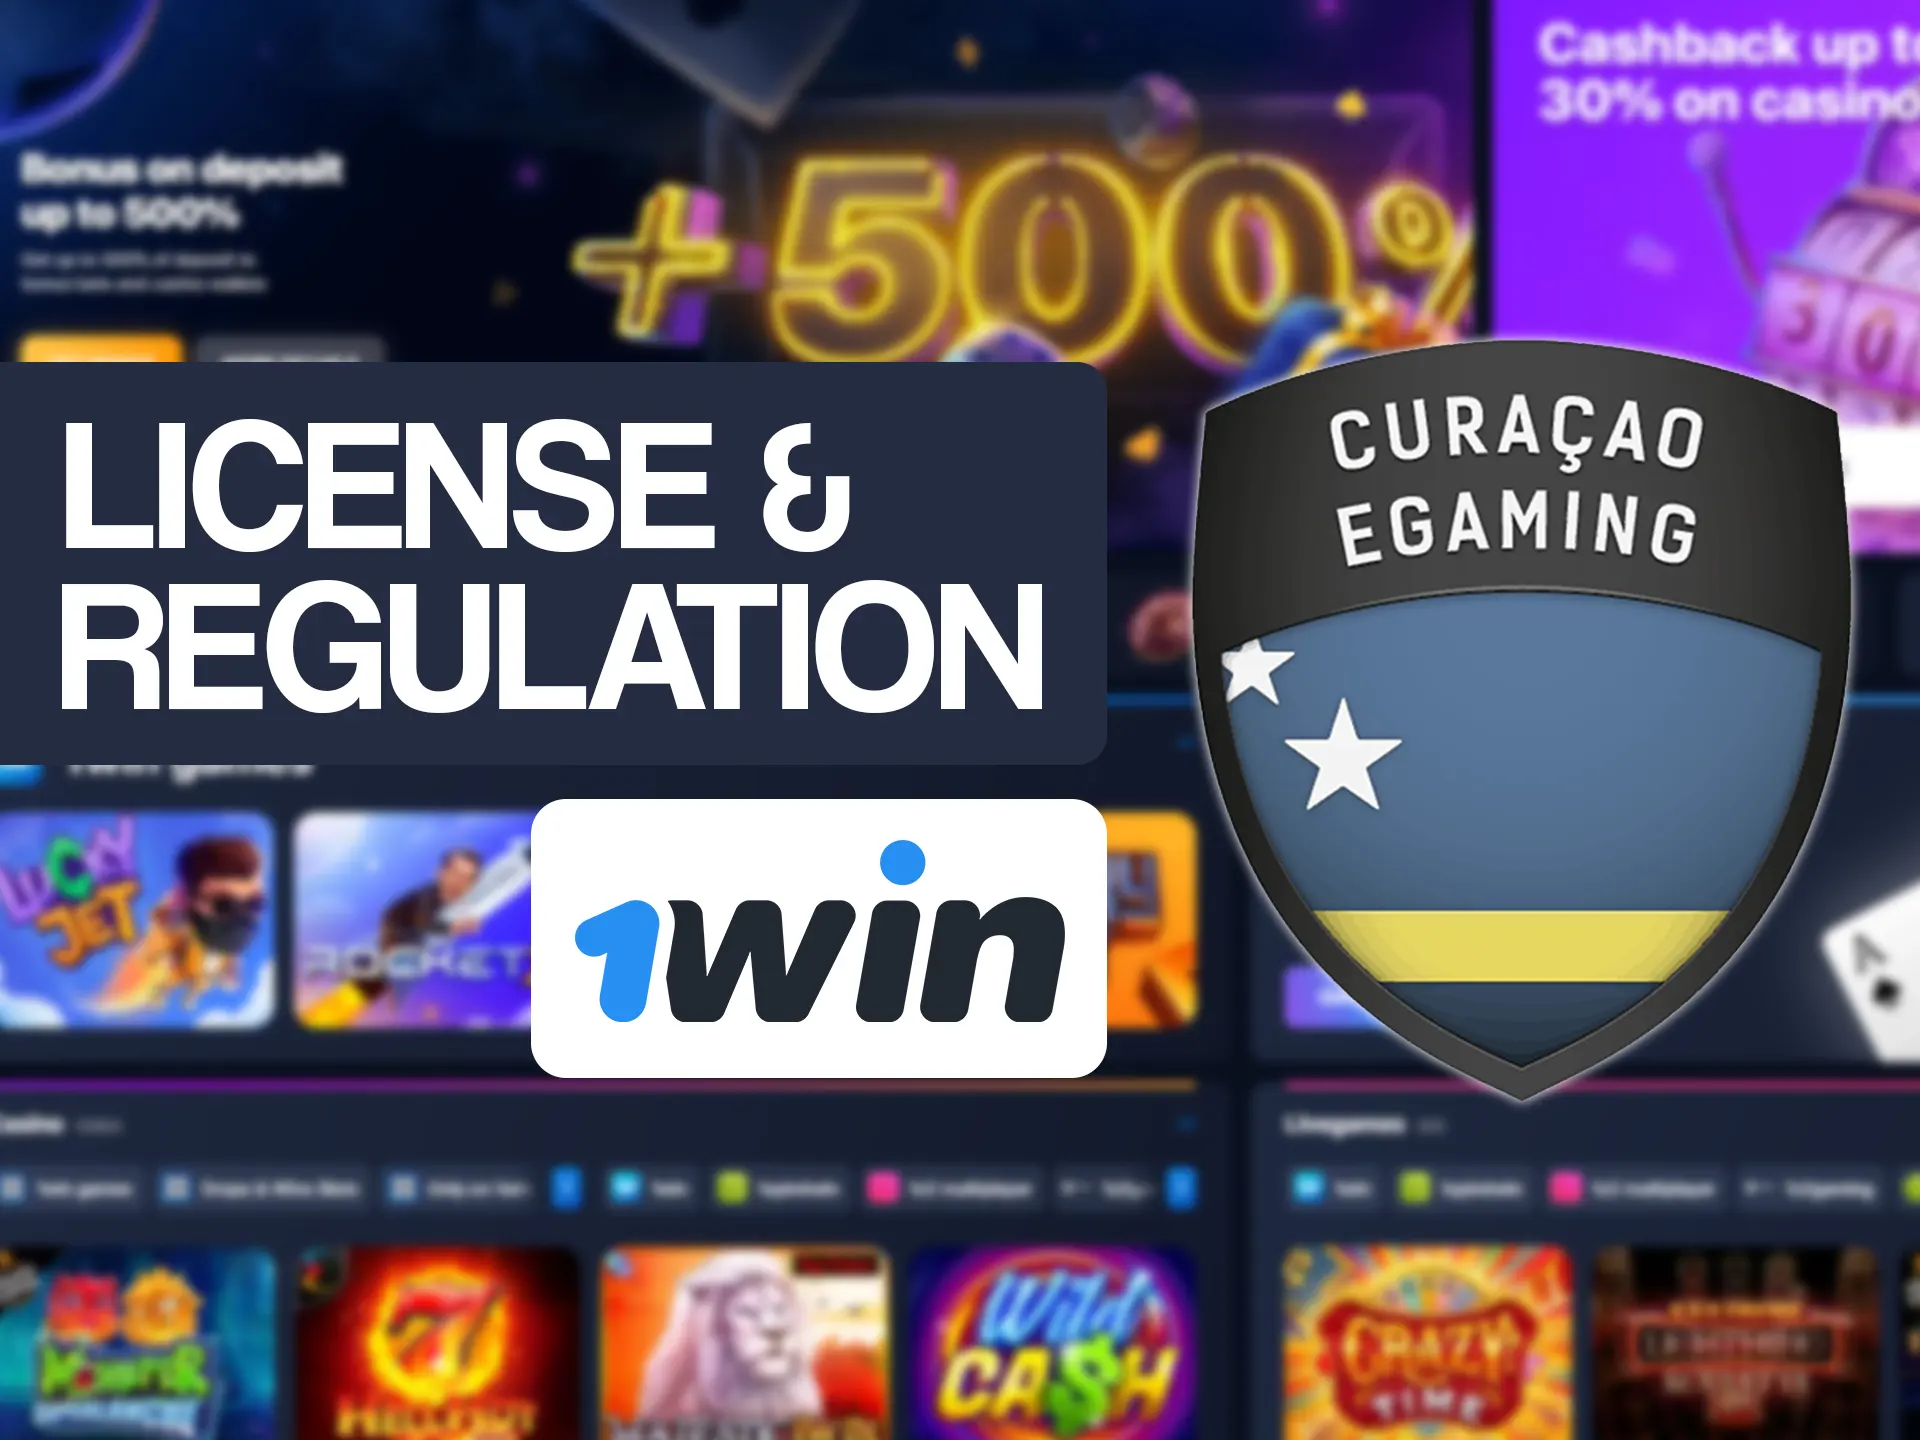 1win follows all of the requiered licenses.